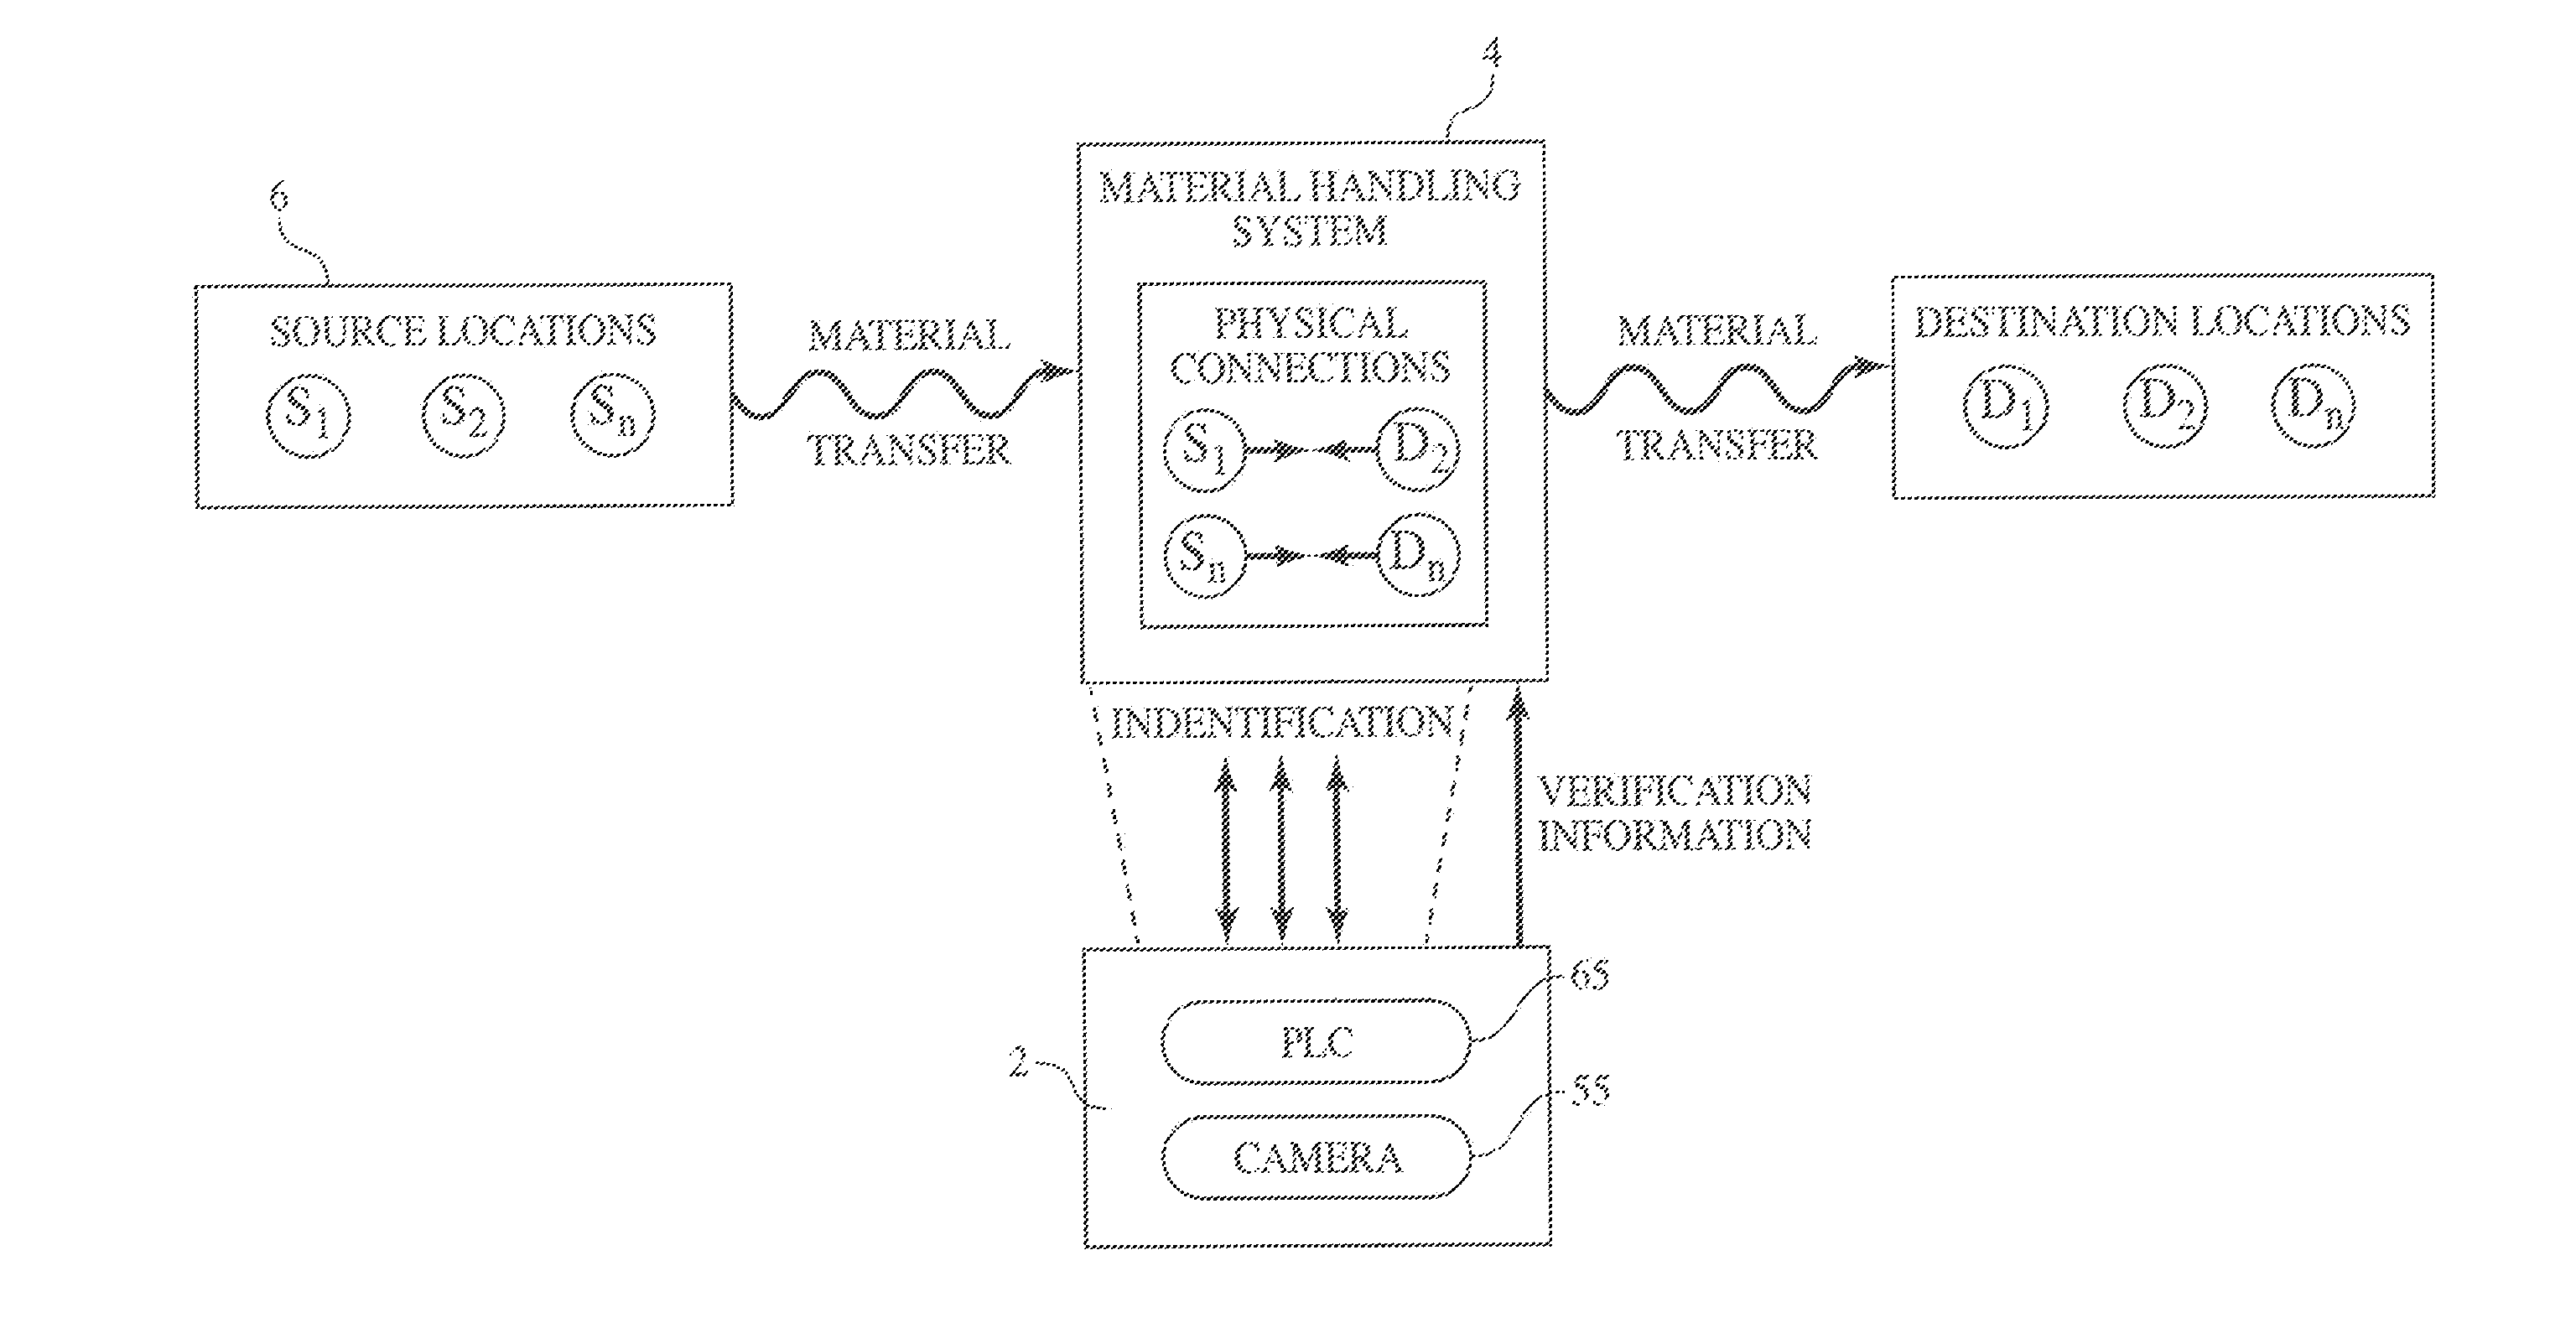 Method and Process of Verifying Physical Connections Within a Material Handling System